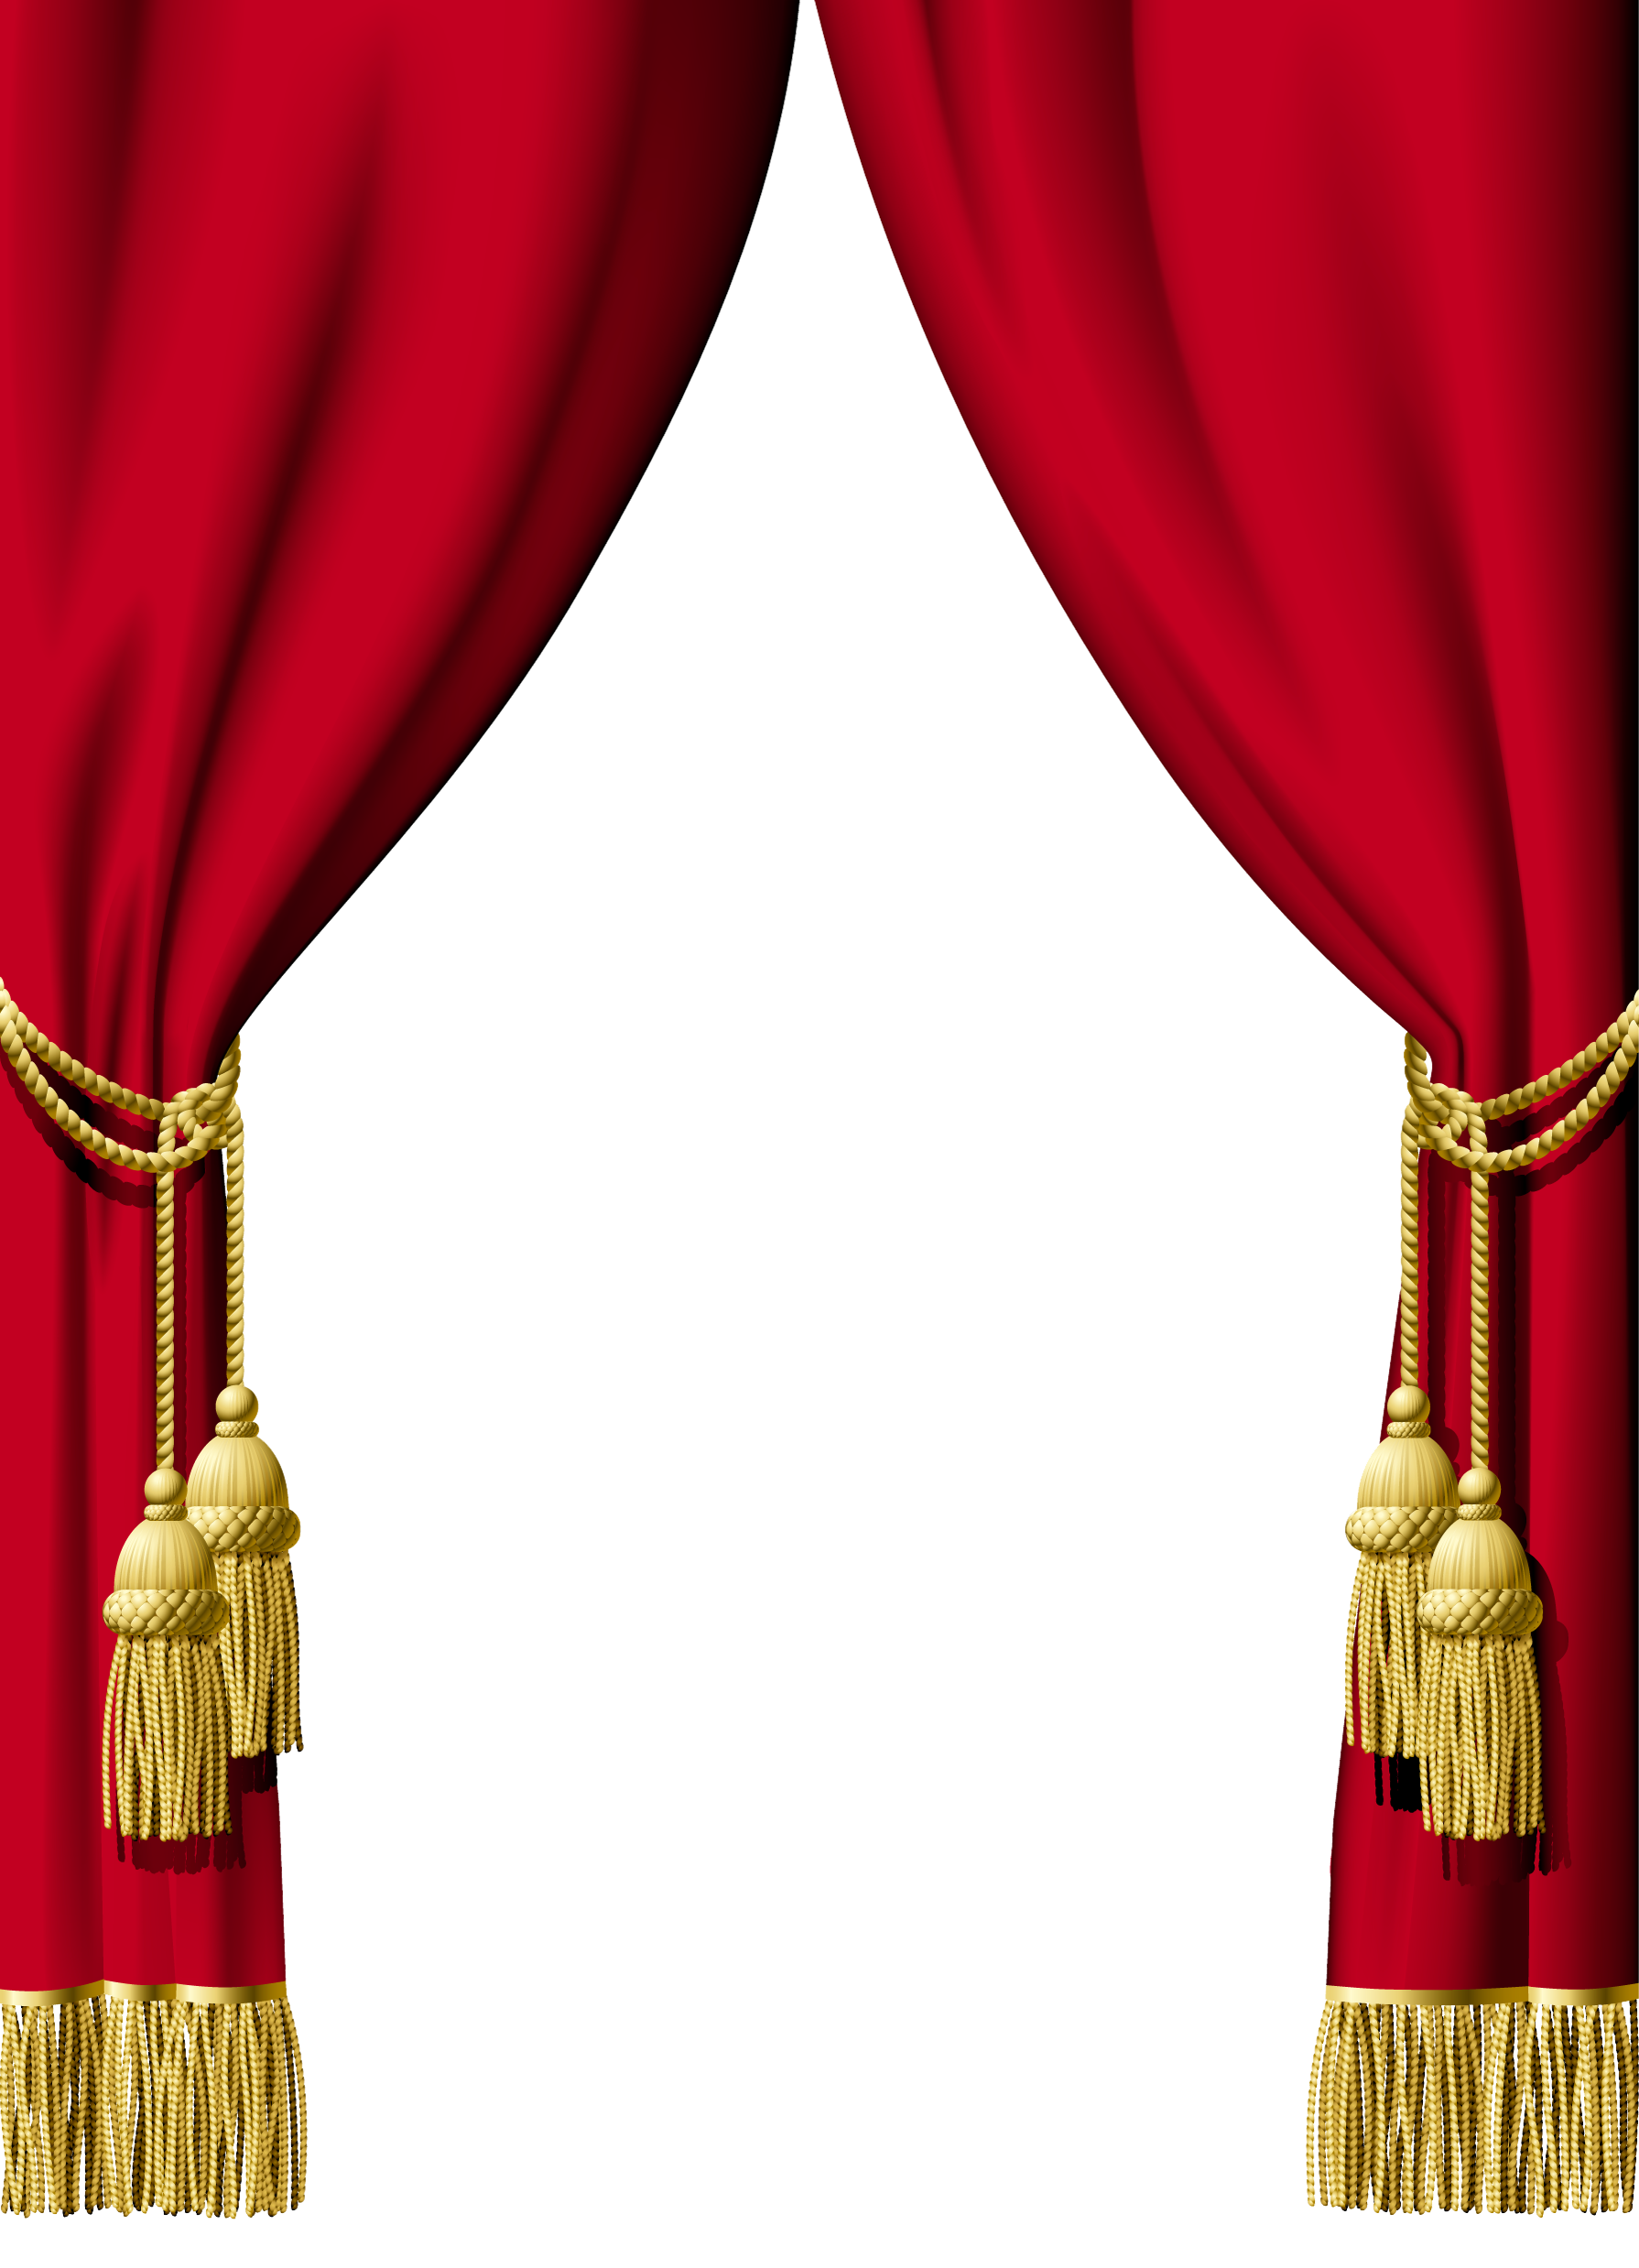 Curtain Download PNG, Curtain HD PNG - Free PNG